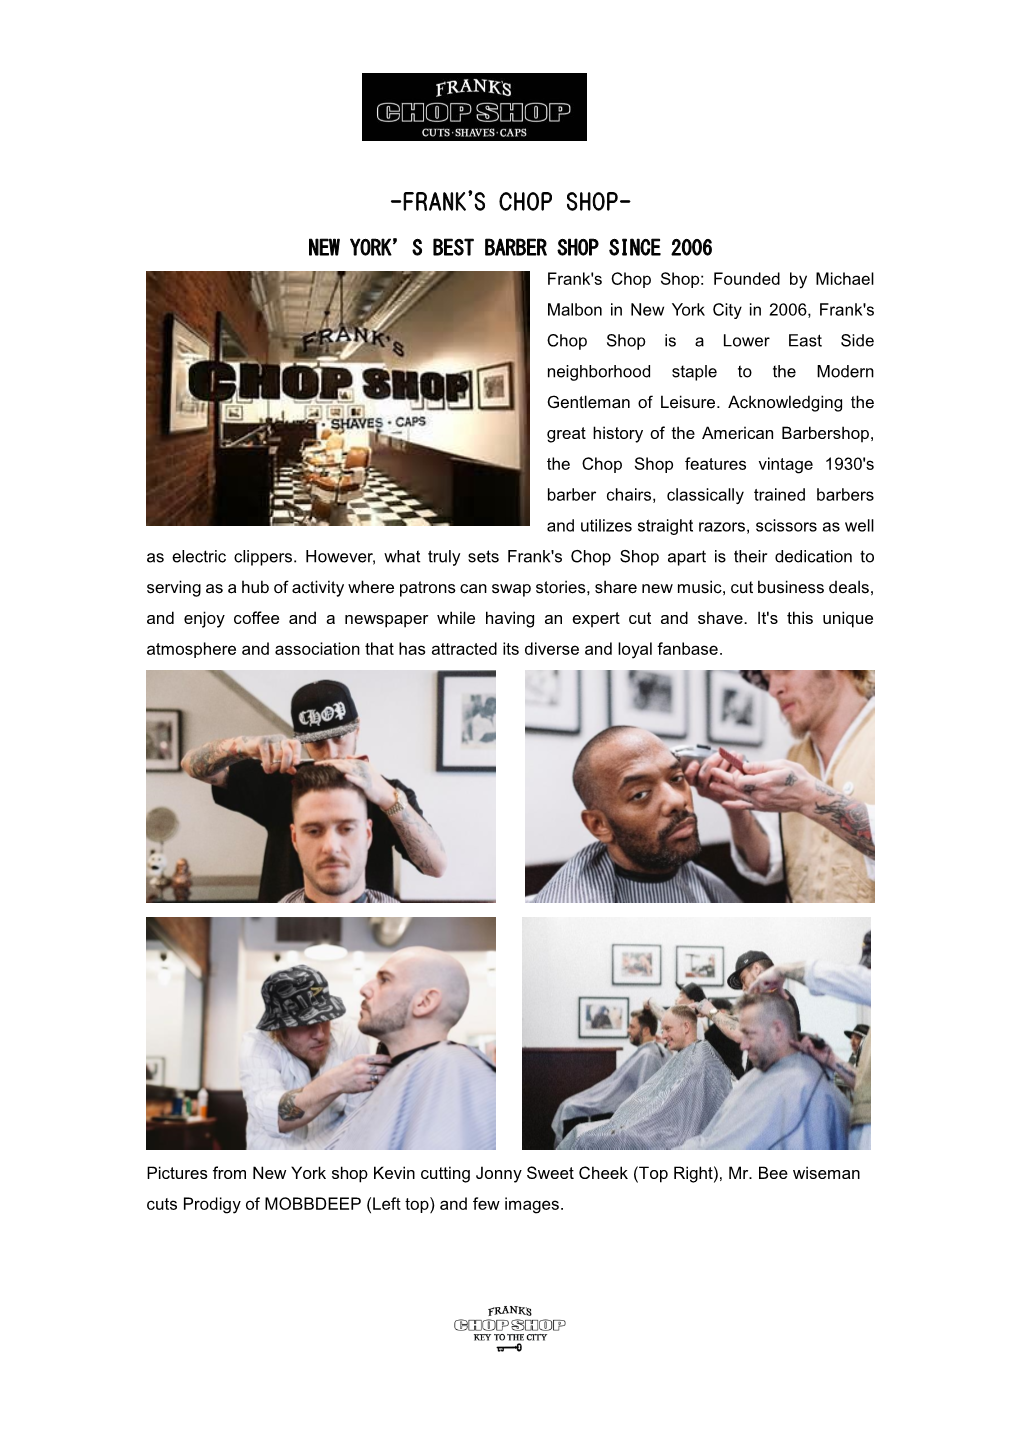 Frank's Chop Shop: Founded by Michael Malbon in New York City in 2006, Frank's Chop Shop Is a Lower East Side Neighborhood Staple to the Modern Gentleman of Leisure